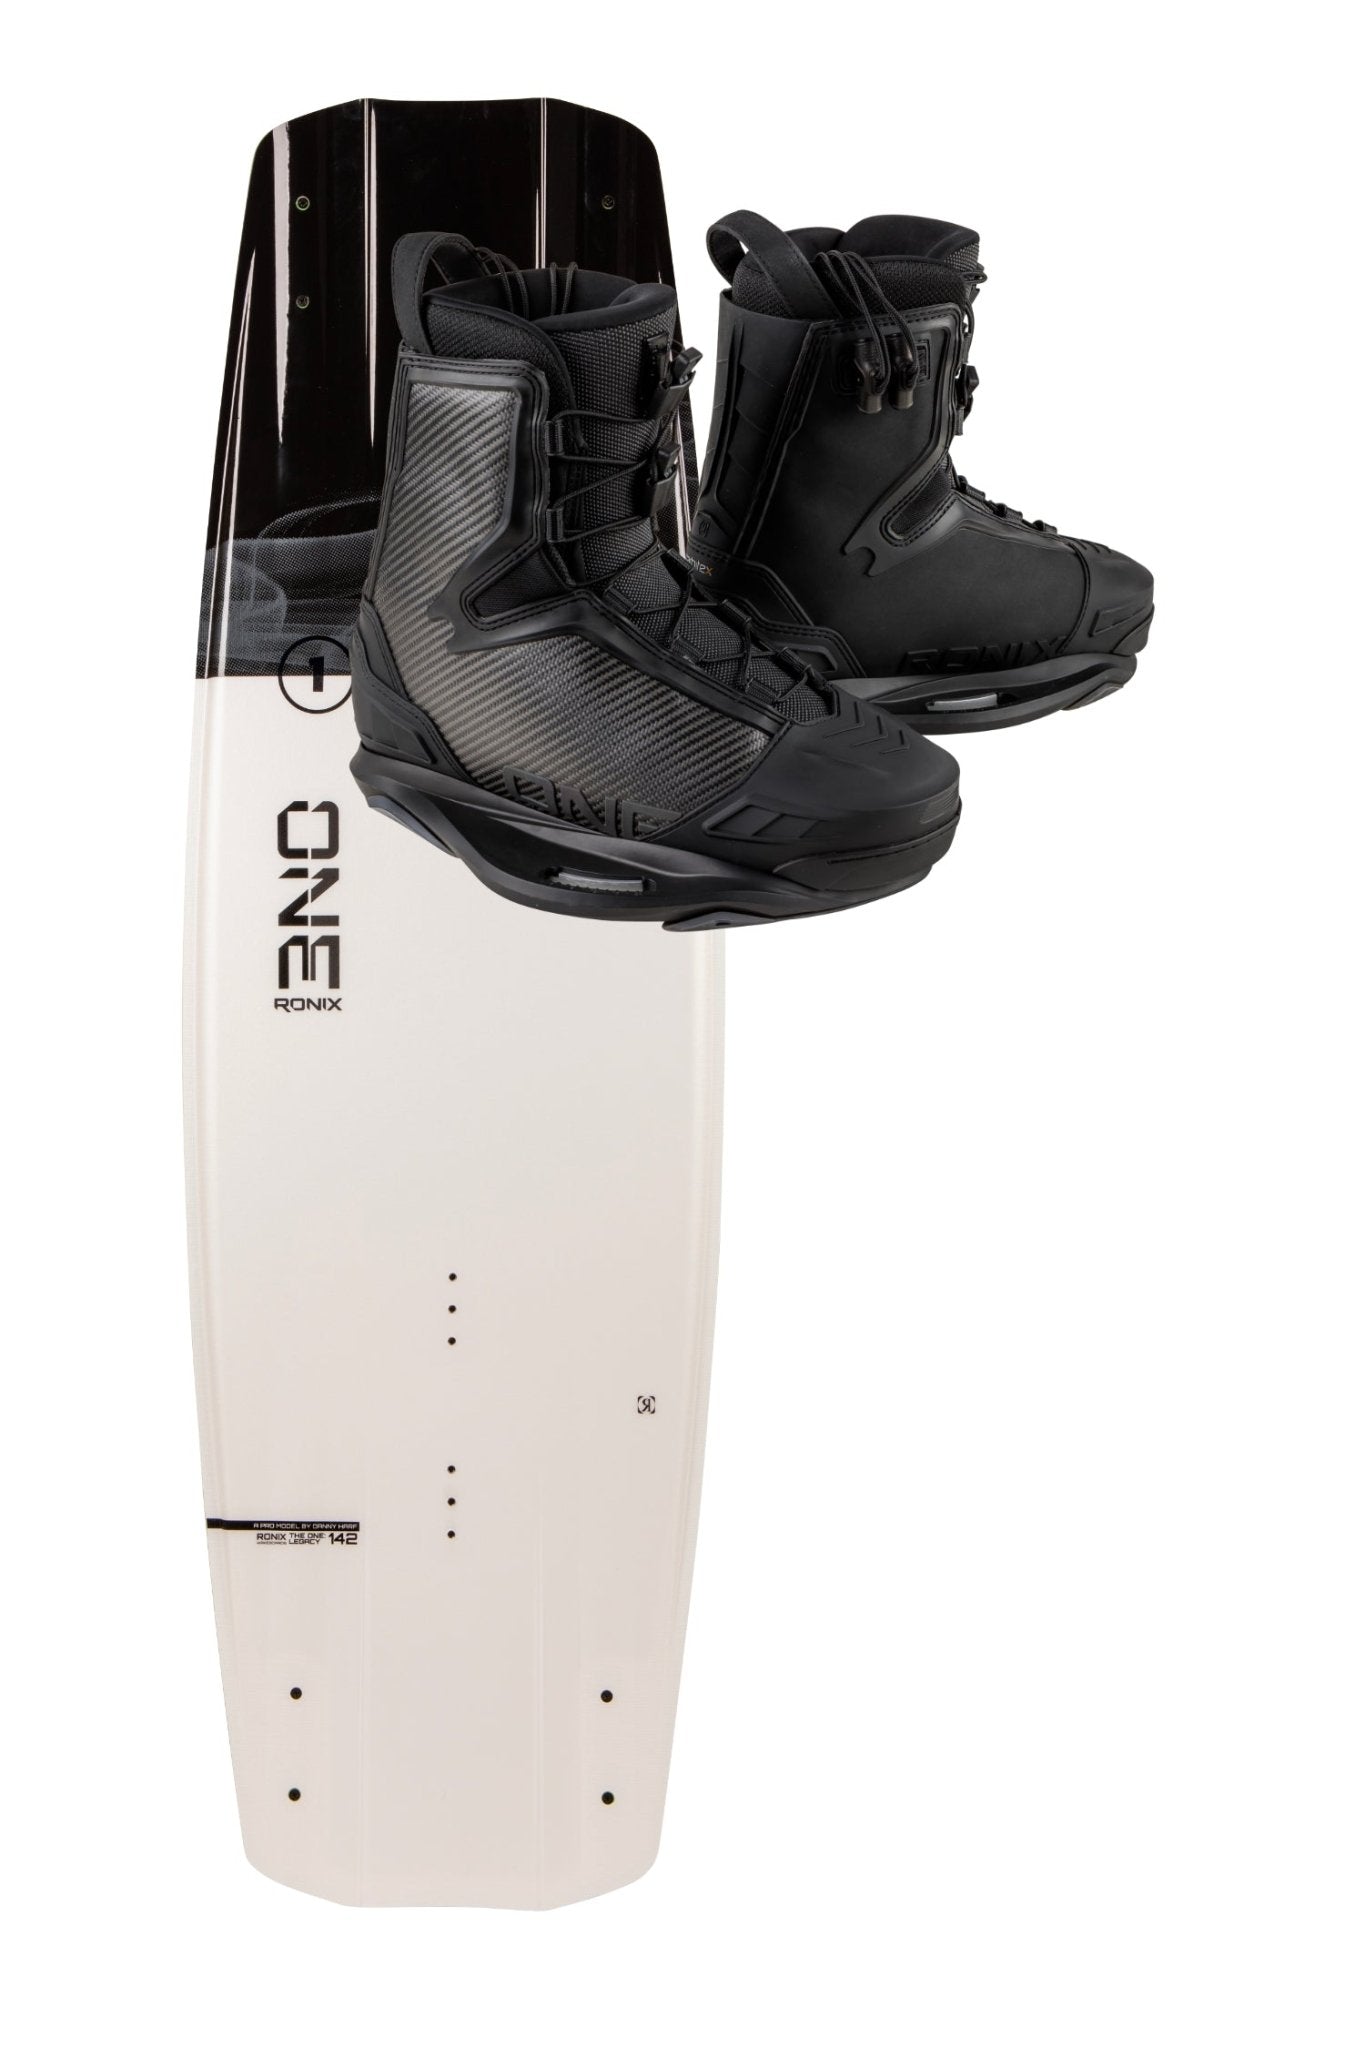 2024 One legacy Core Wakeboard -Ronix242020-134-One Carbitex-US 6 to 7